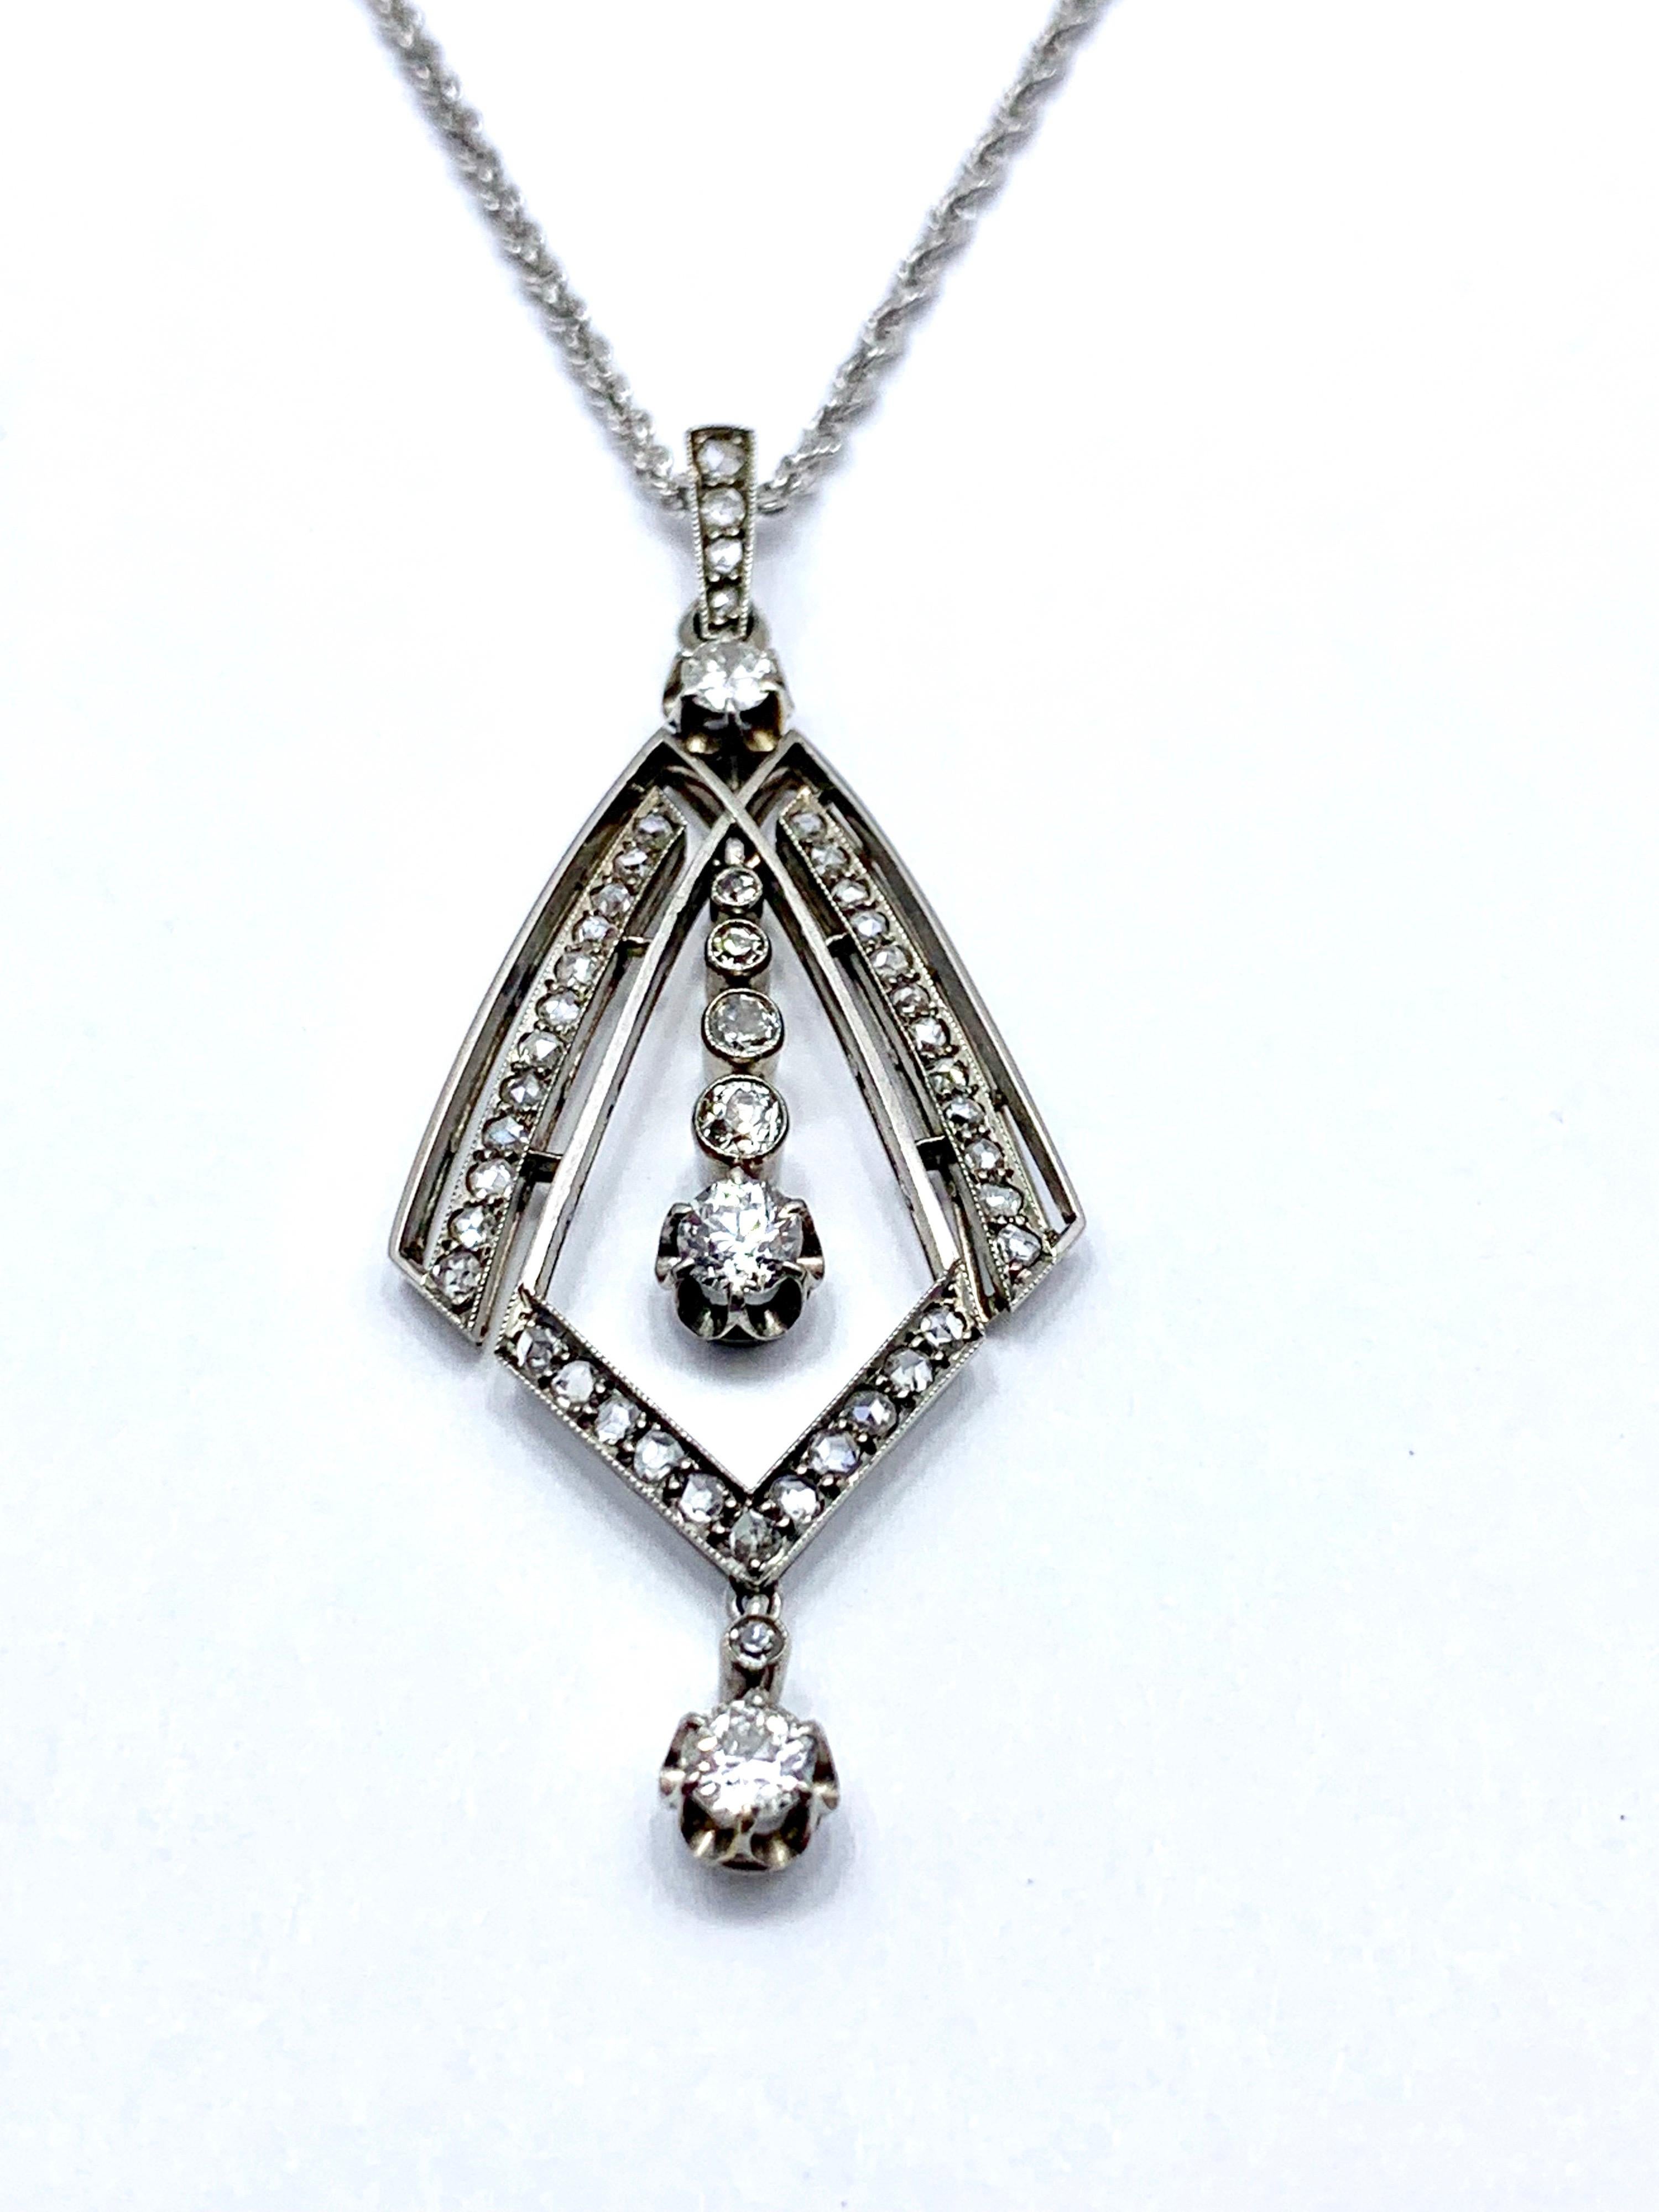 An absolutely stunning Art Deco Old European and rose cut Diamond pendant set in white gold.  The pendant is a geometric design, handcrafted in the 1920's.  The movement from the center and bottom Diamond suspensions allow for light to hit from many